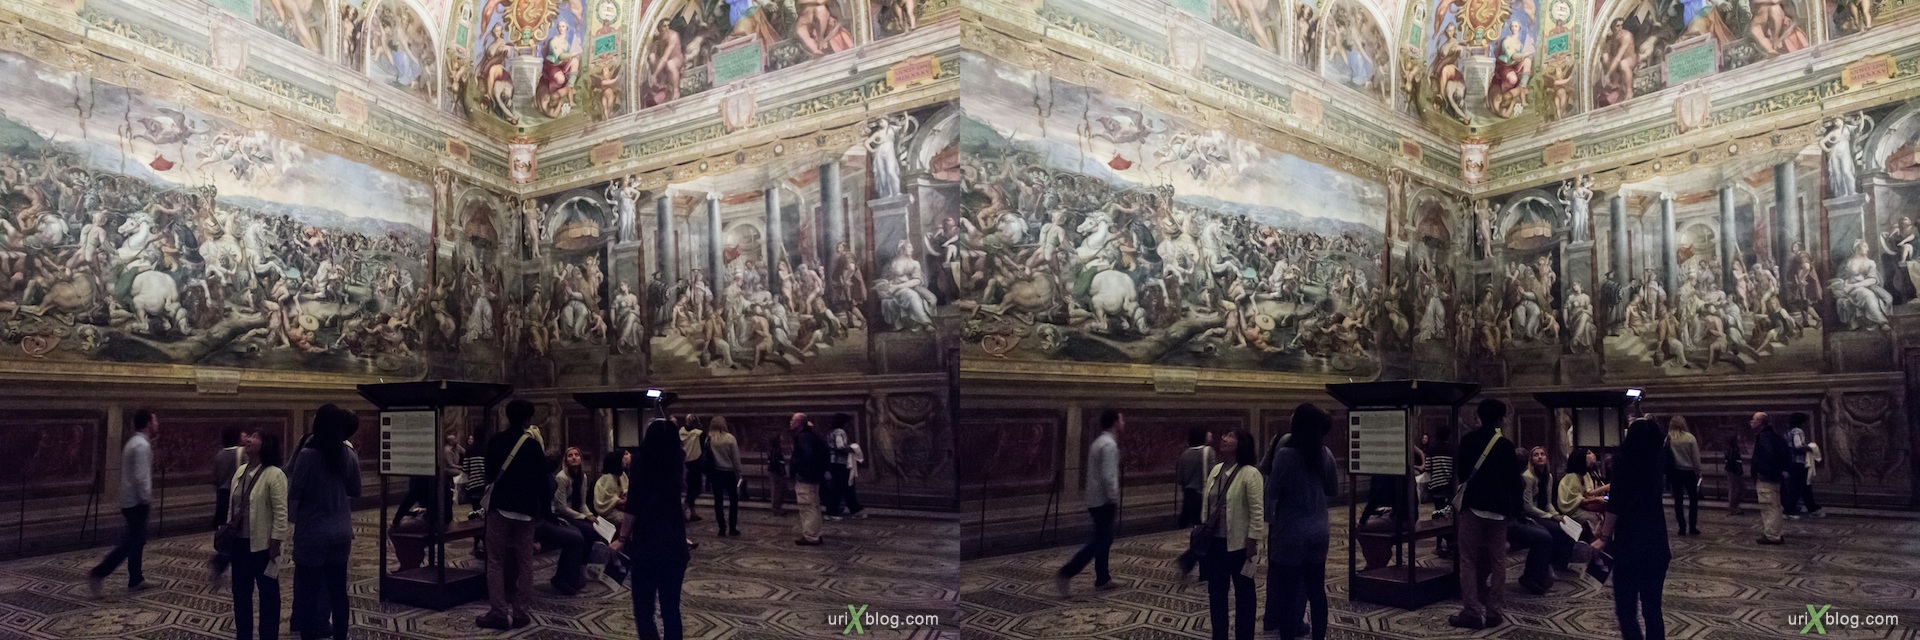 2012, Vatican museums, Rome, Italy, 3D, stereo pair, cross-eyed, crossview, cross view stereo pair